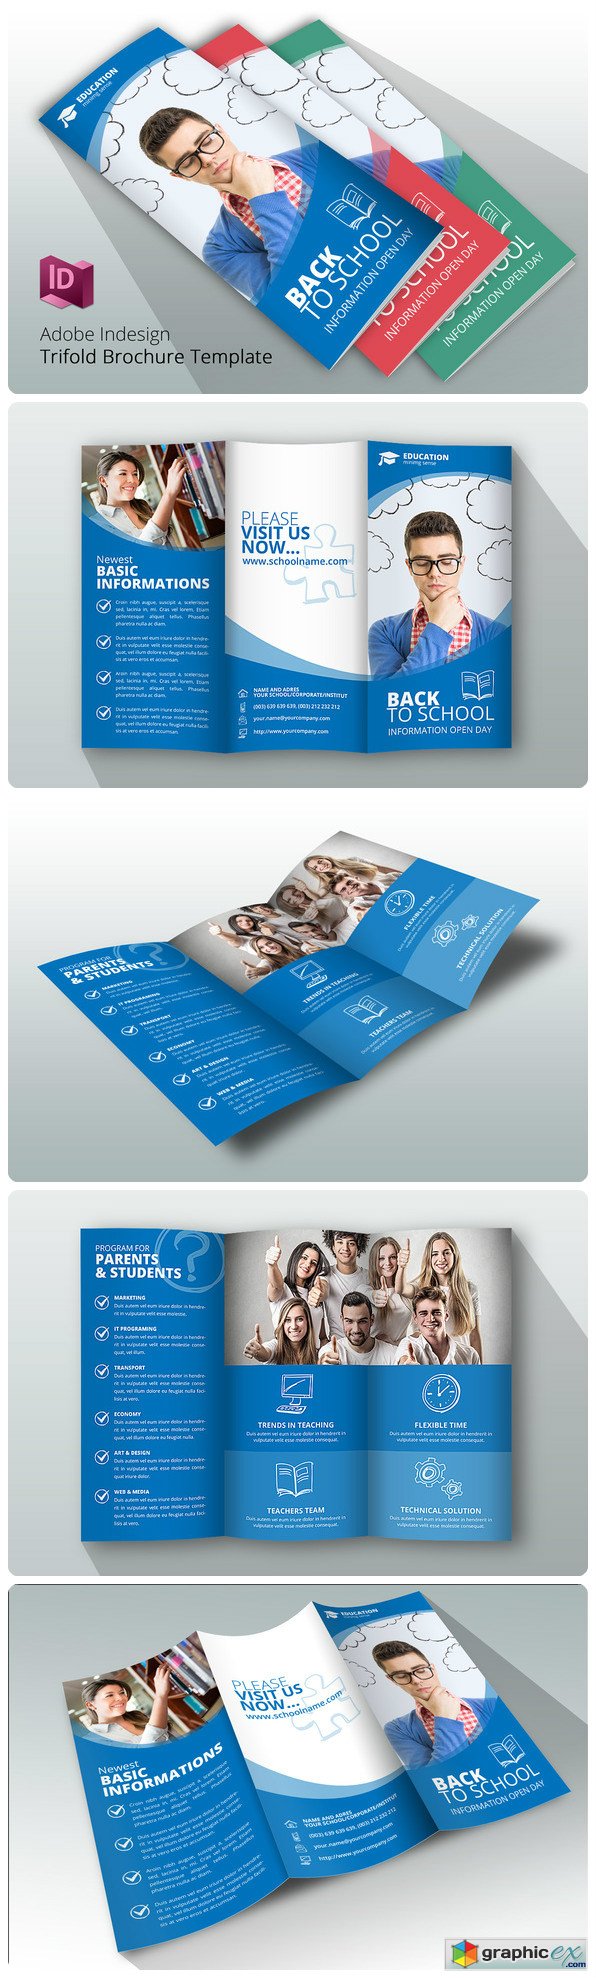 Trifold Back to School Brochure